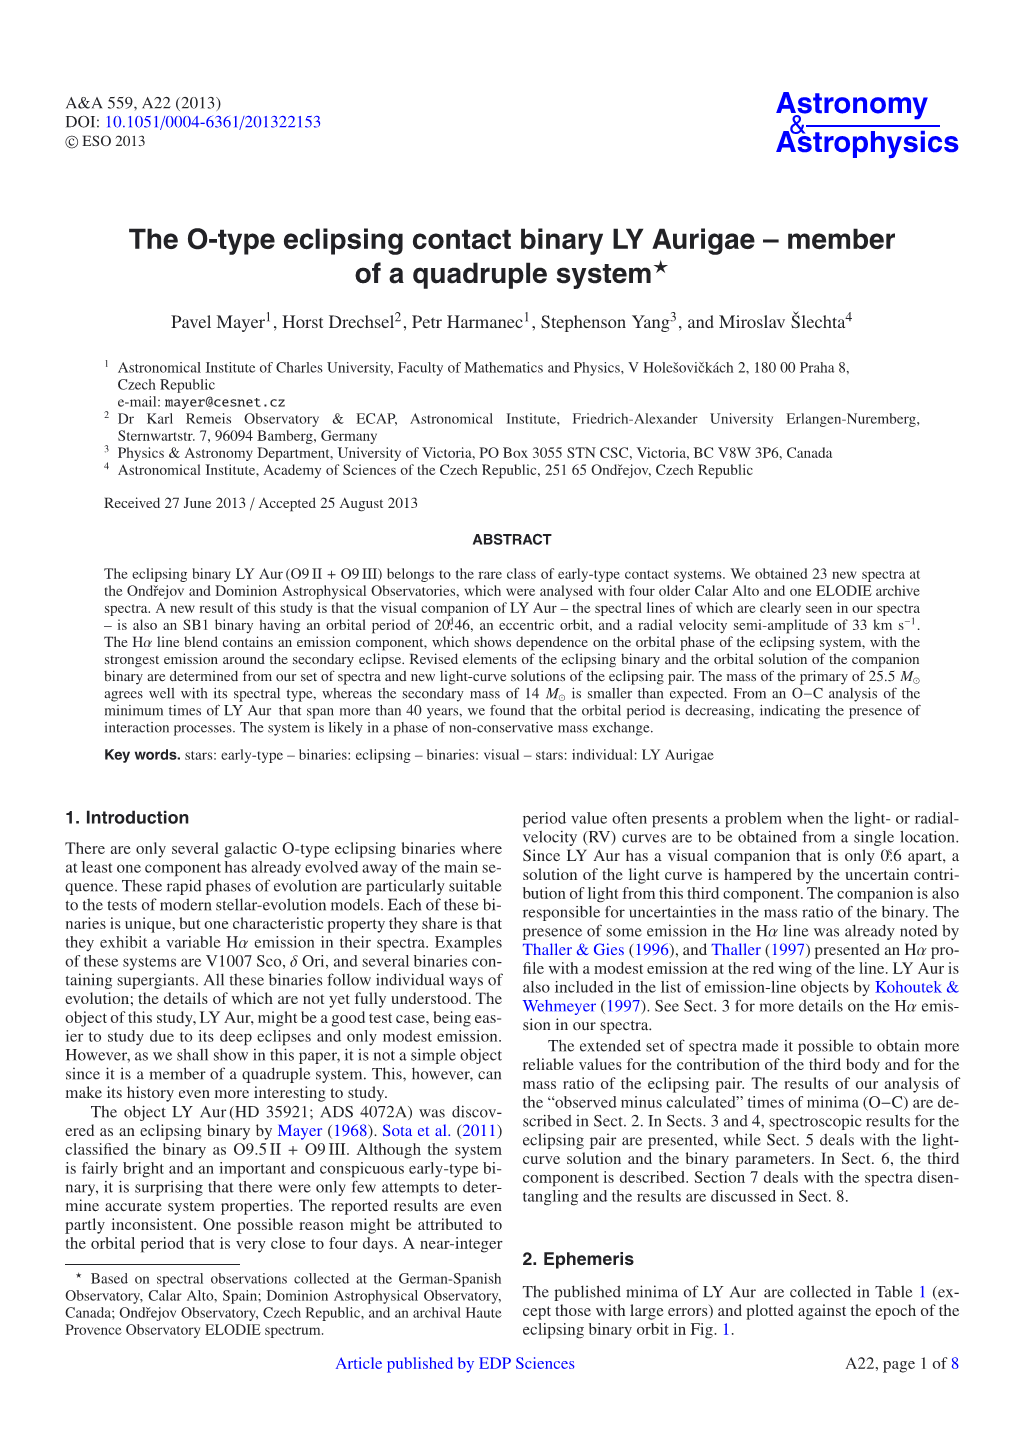 The O-Type Eclipsing Contact Binary LY Aurigae – Member of a Quadruple System